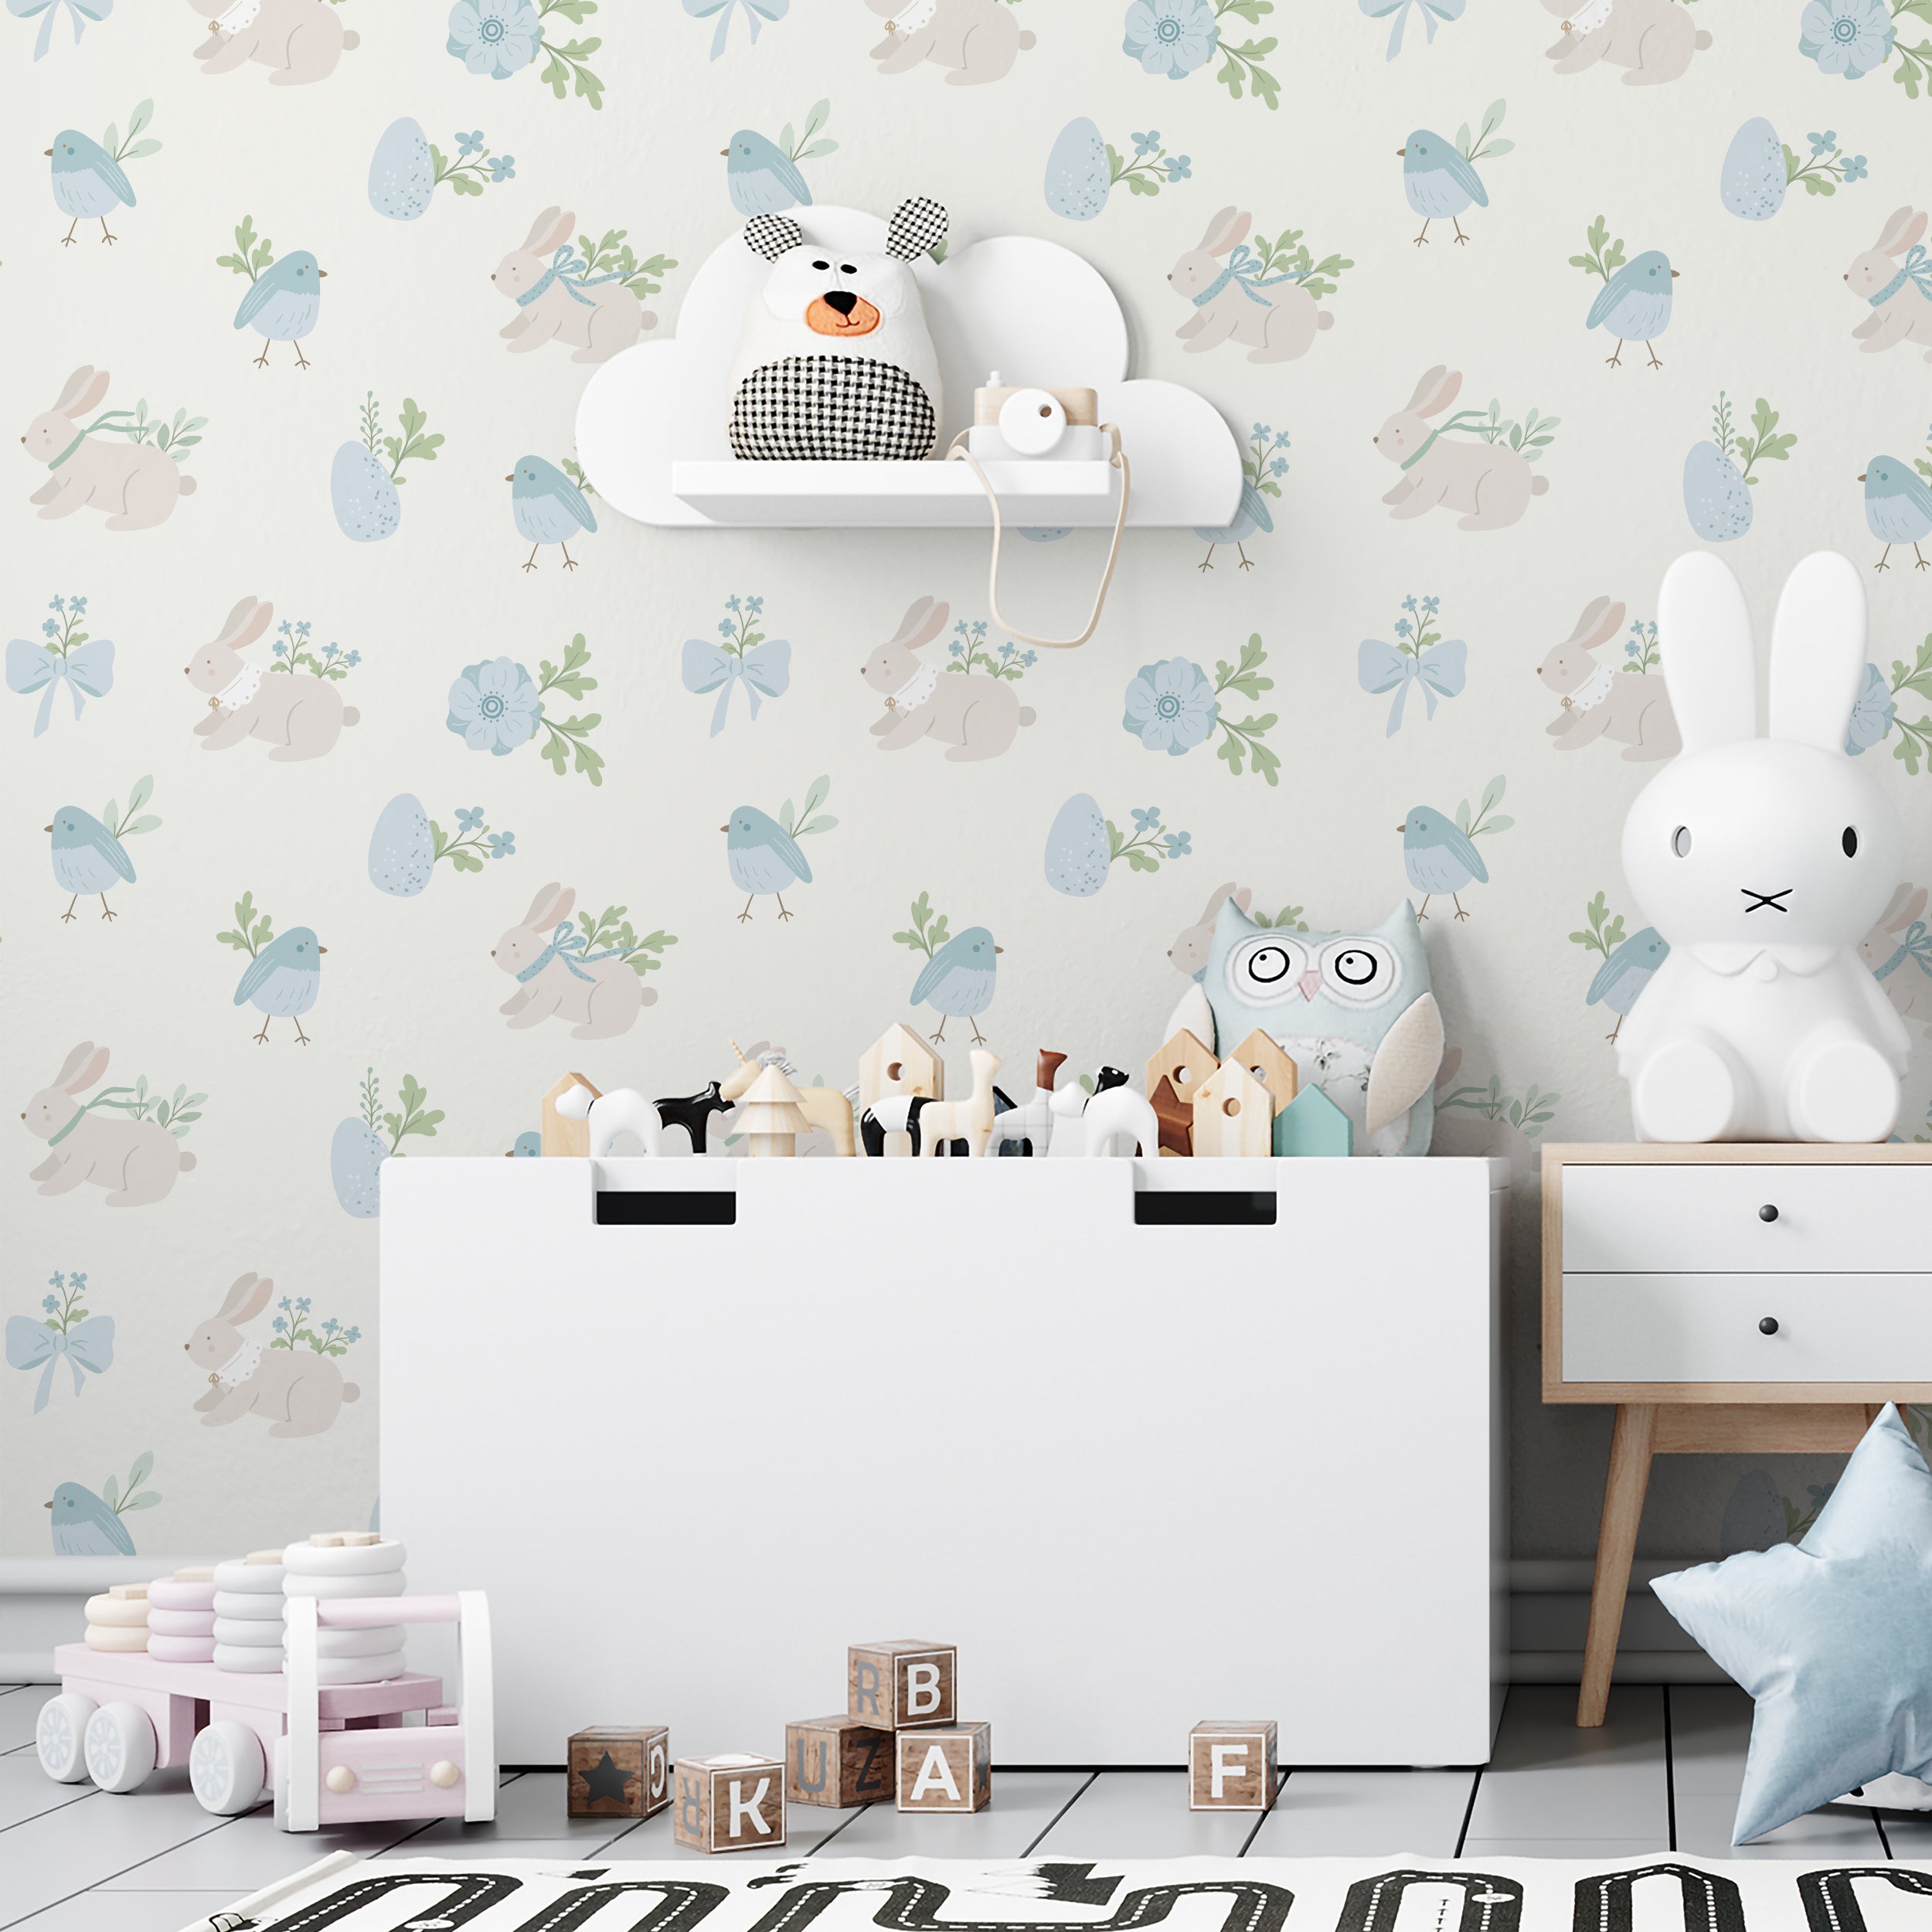 Children’s room decorated with Bunny and Bird Wallpaper showing a playful and enchanting scene of pastel-colored bunnies and birds amidst floral accents and decorative eggs, enhancing the room's soft and inviting atmosphere.